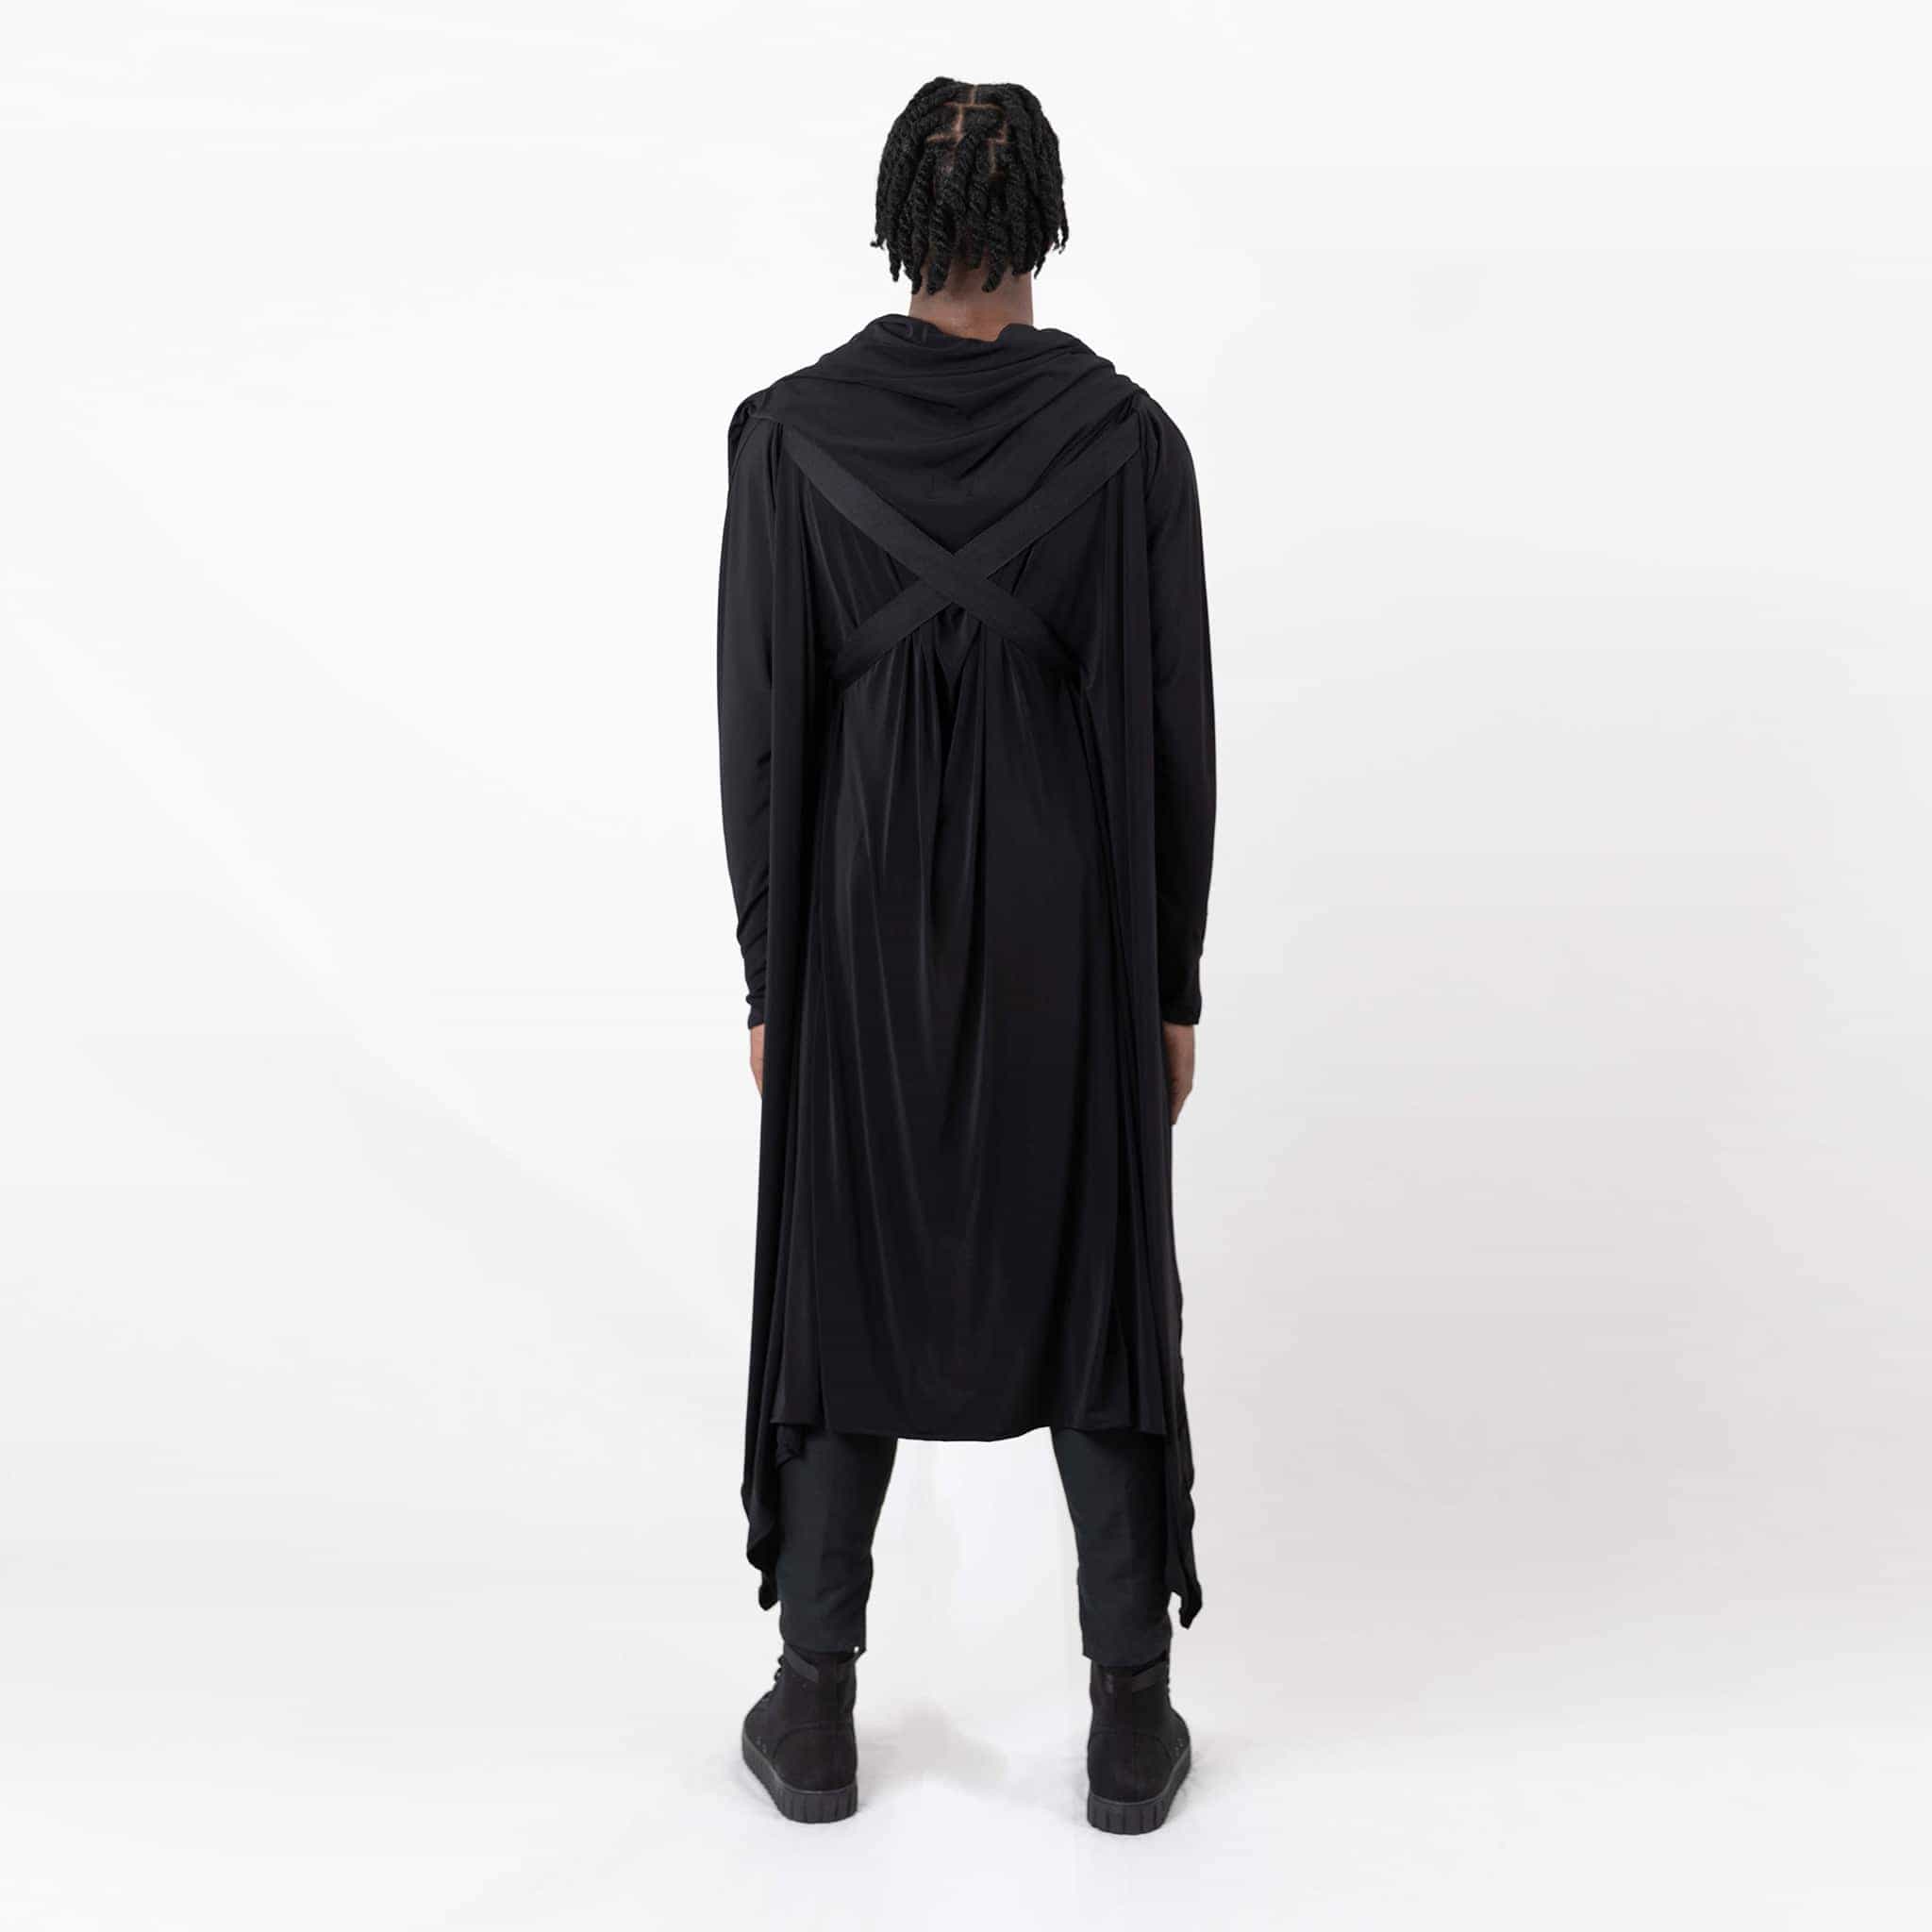   ZERØ London - Back full length view, black long sleeved zero waste cardigan robe with harness and black trousers designed & made in London